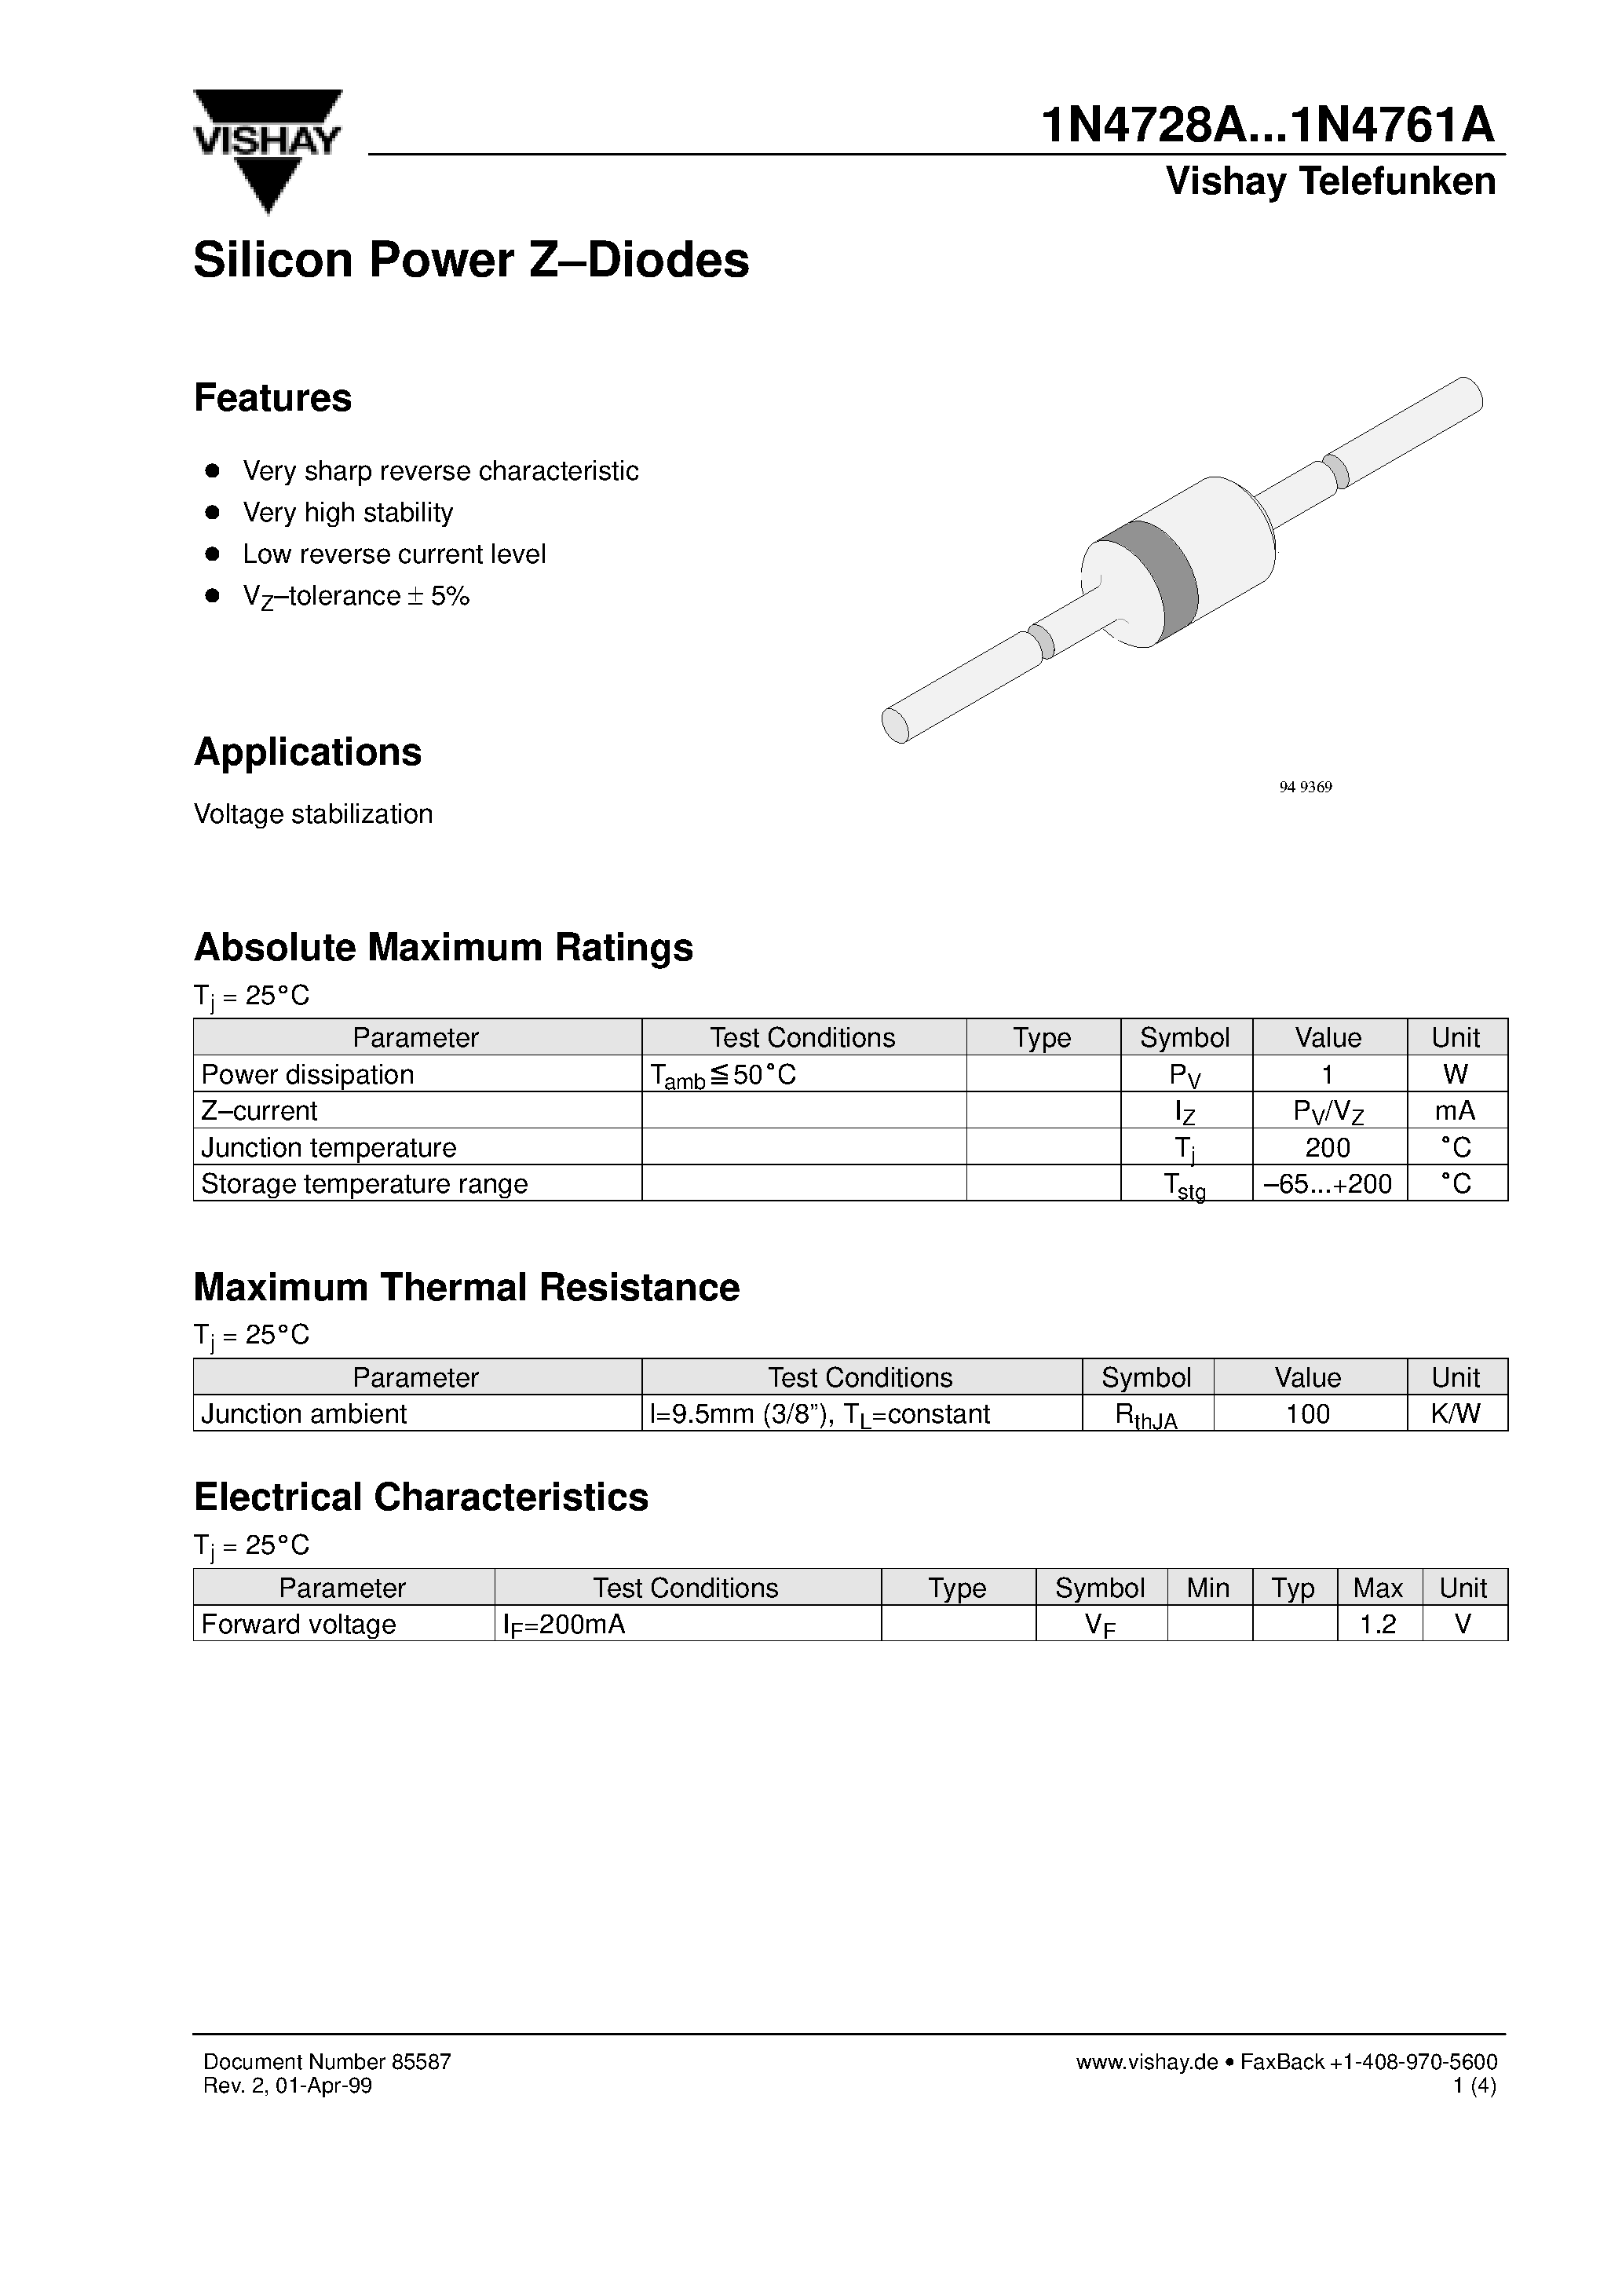 Datasheet 1N4728 - Silicon Power Z-Diodes page 1